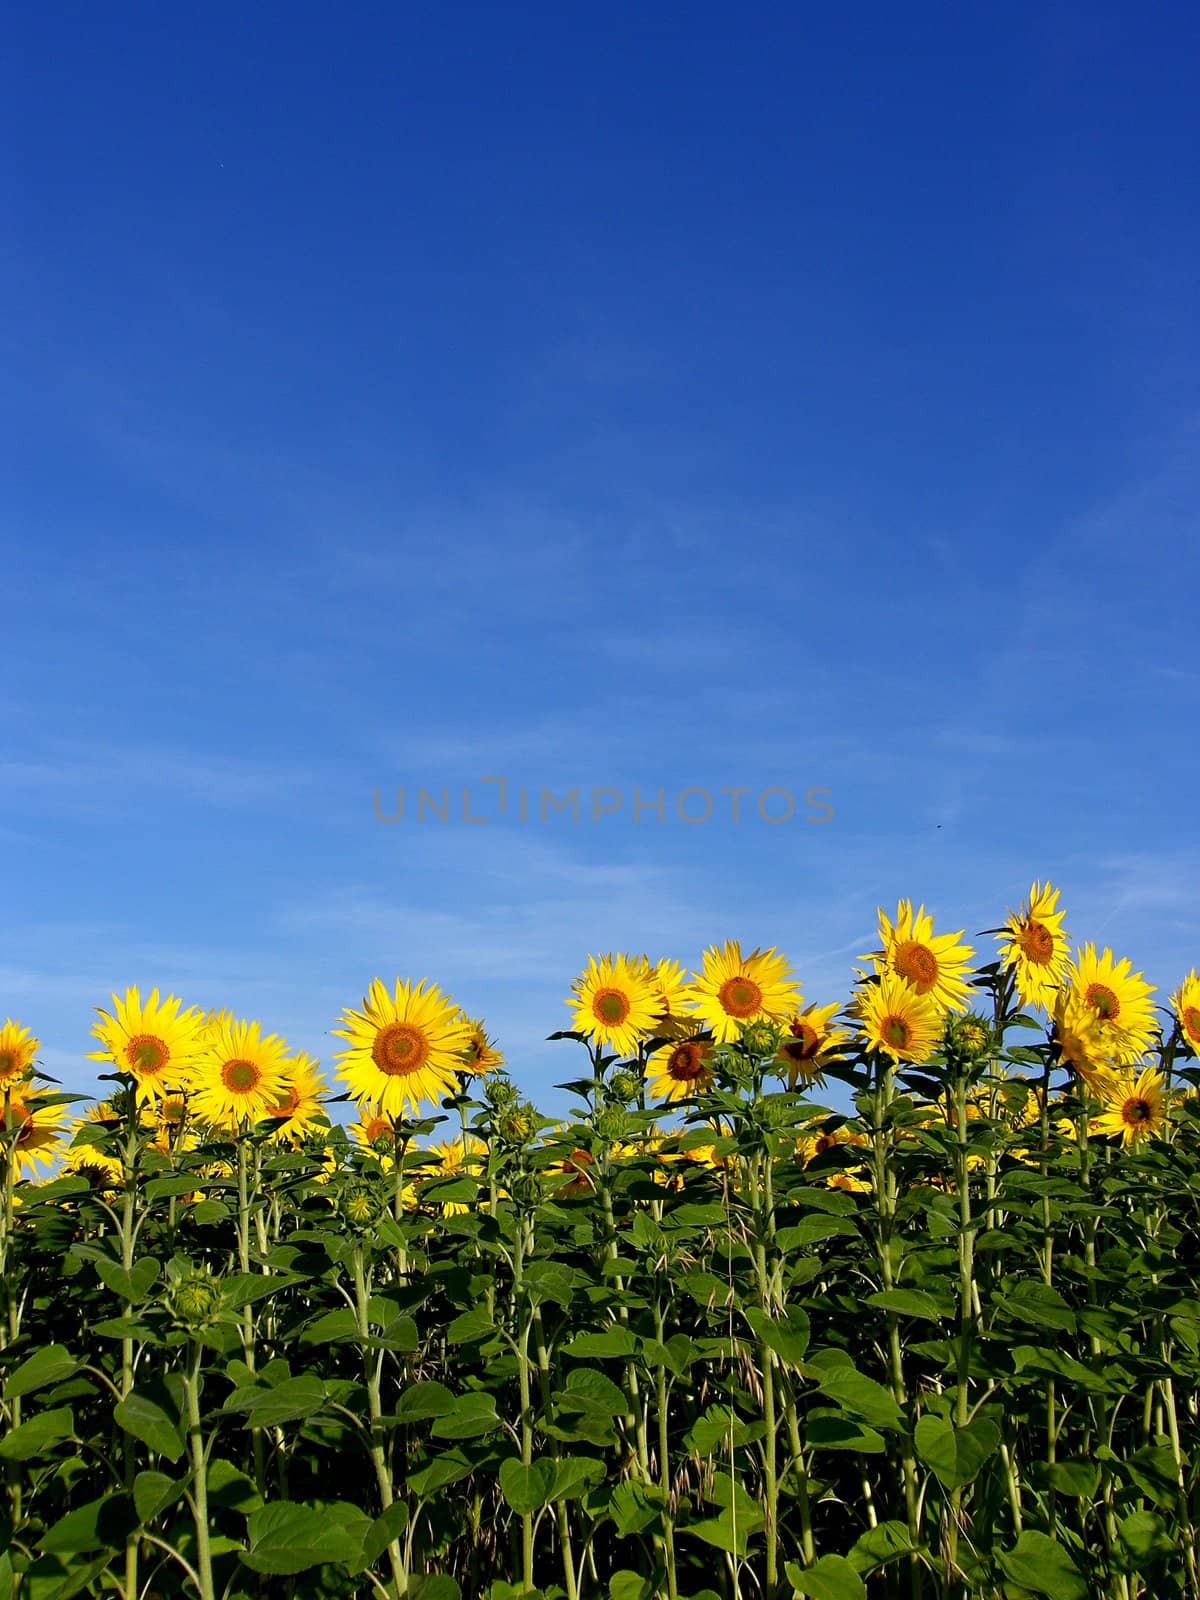 field of sunflowers by peromarketing